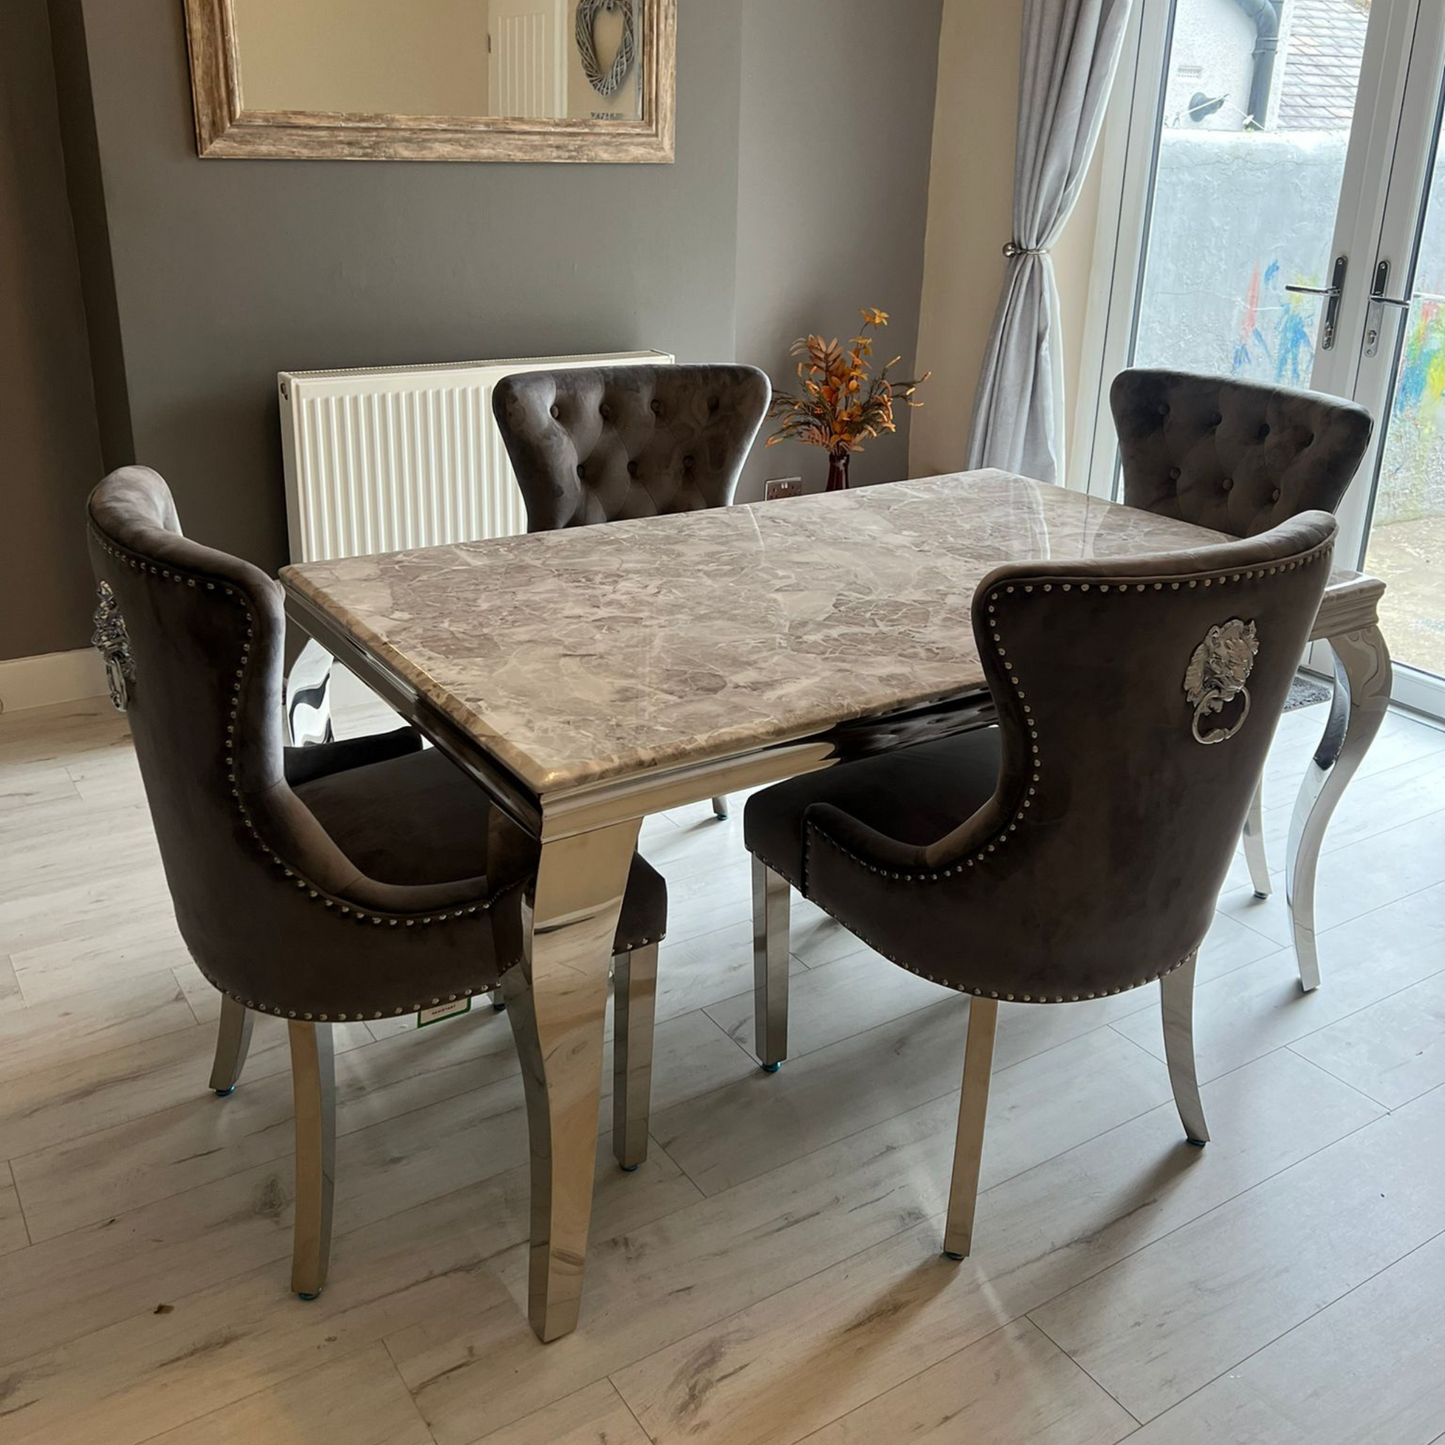 1.5 Grey Louis with 4 Lion Knocker Chairs - Mirror4you